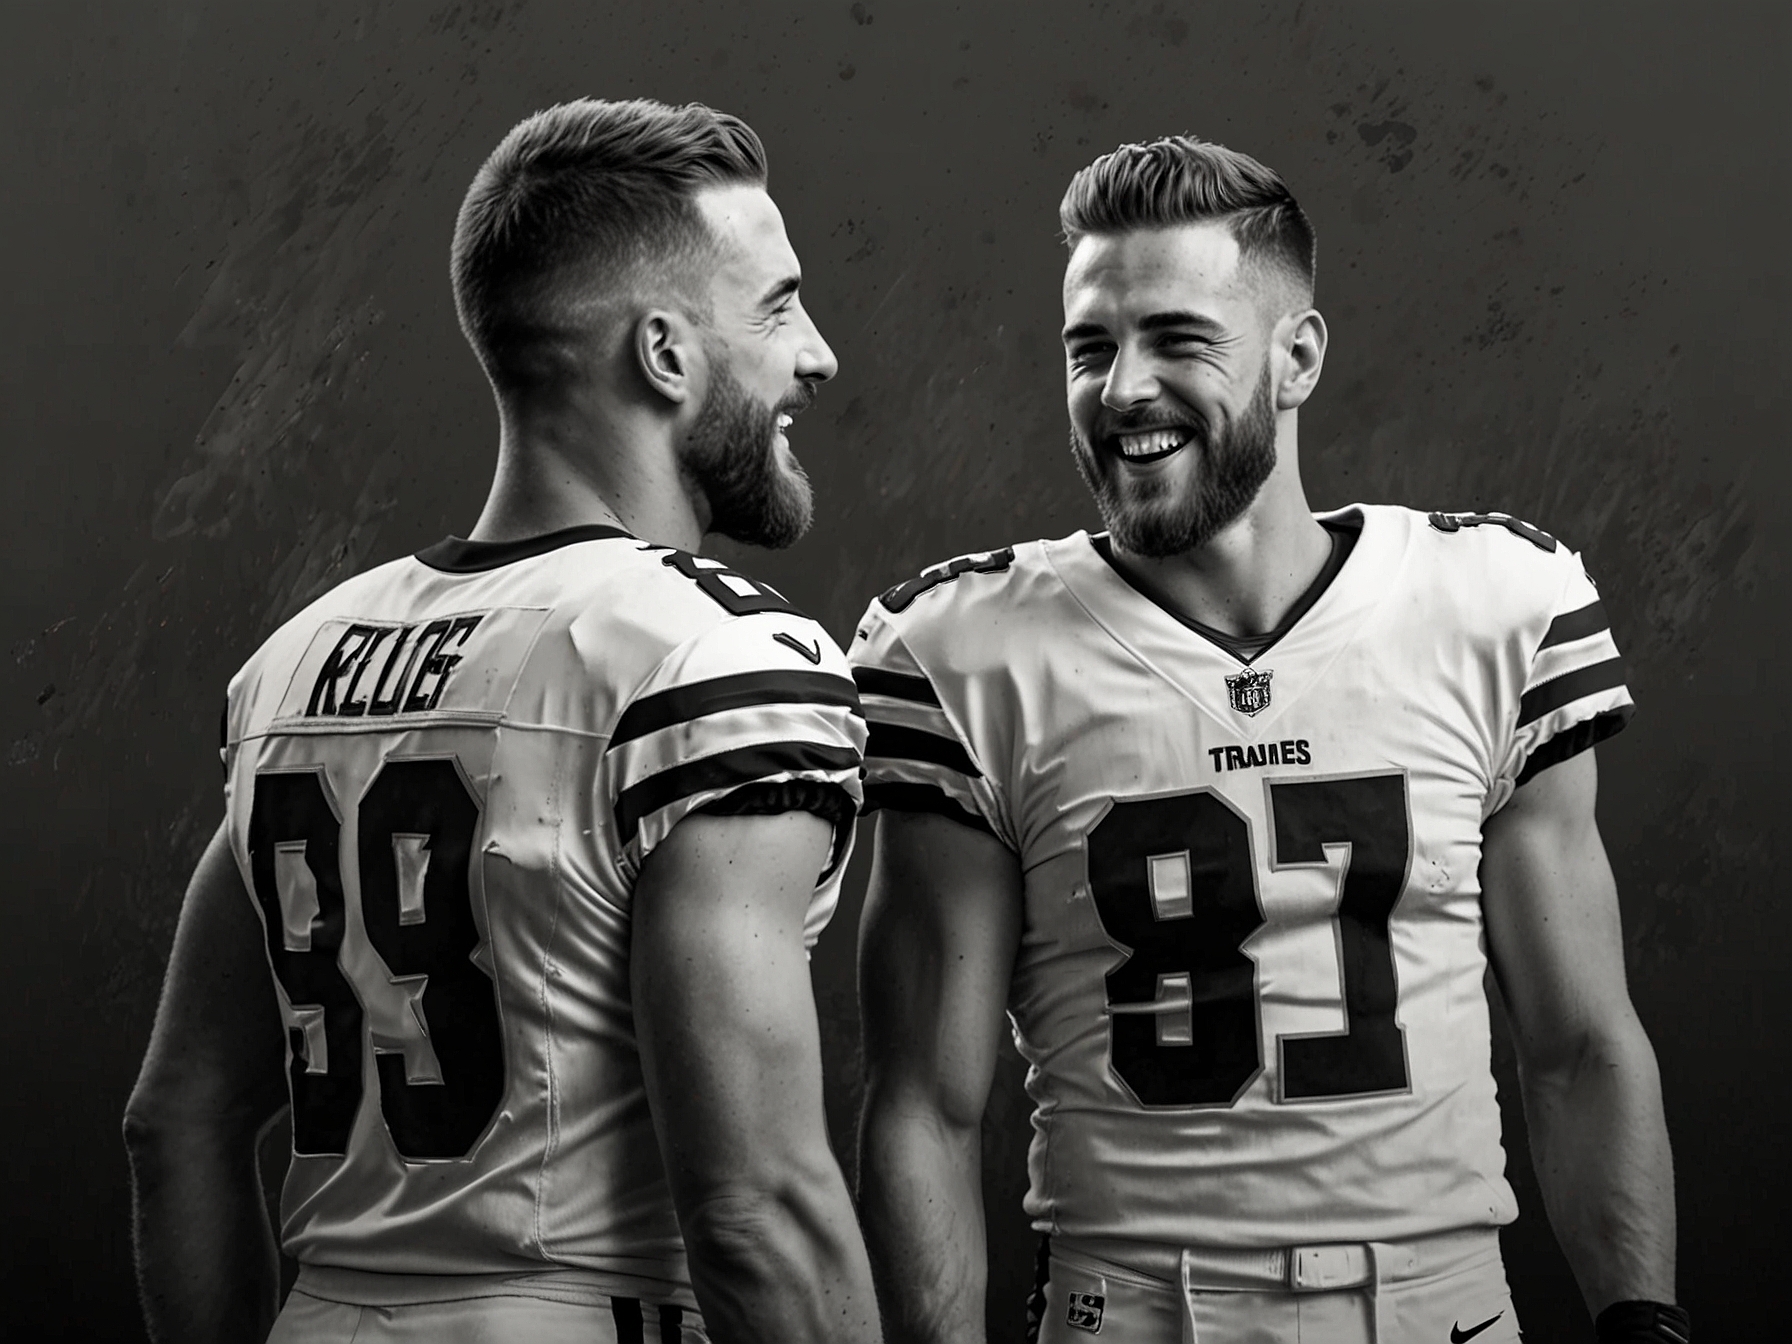 Travis Kelce and Joe Burrow seen chatting and laughing together in Cincinnati, showcasing the camaraderie and friendship between these star NFL players beyond the competitive field.